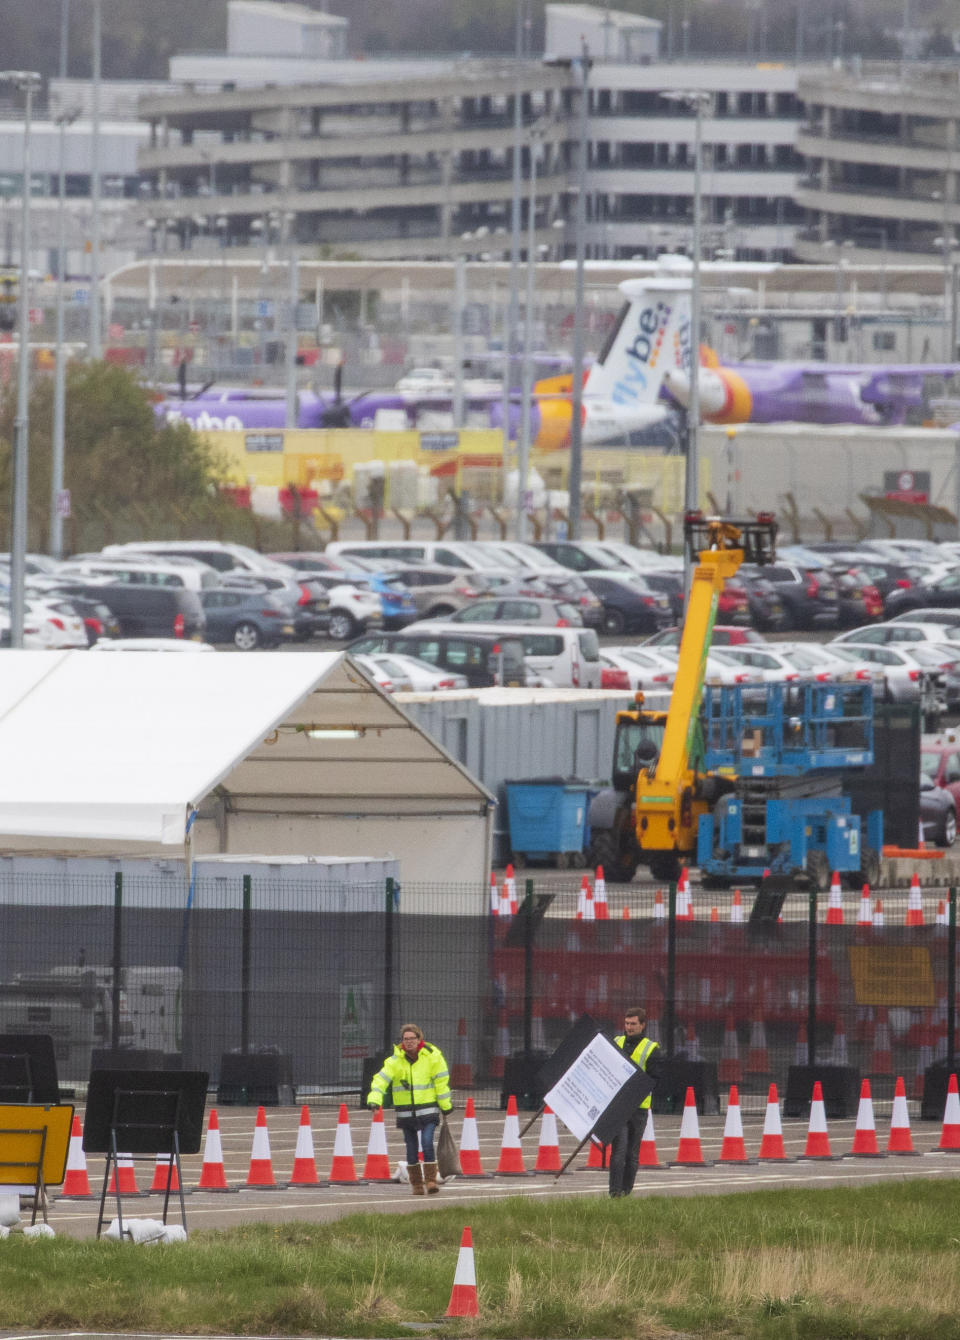 Drive-thru testing site for Covid-19 on a runway at Edinburgh Airport. April 16 2020. (SWNS)